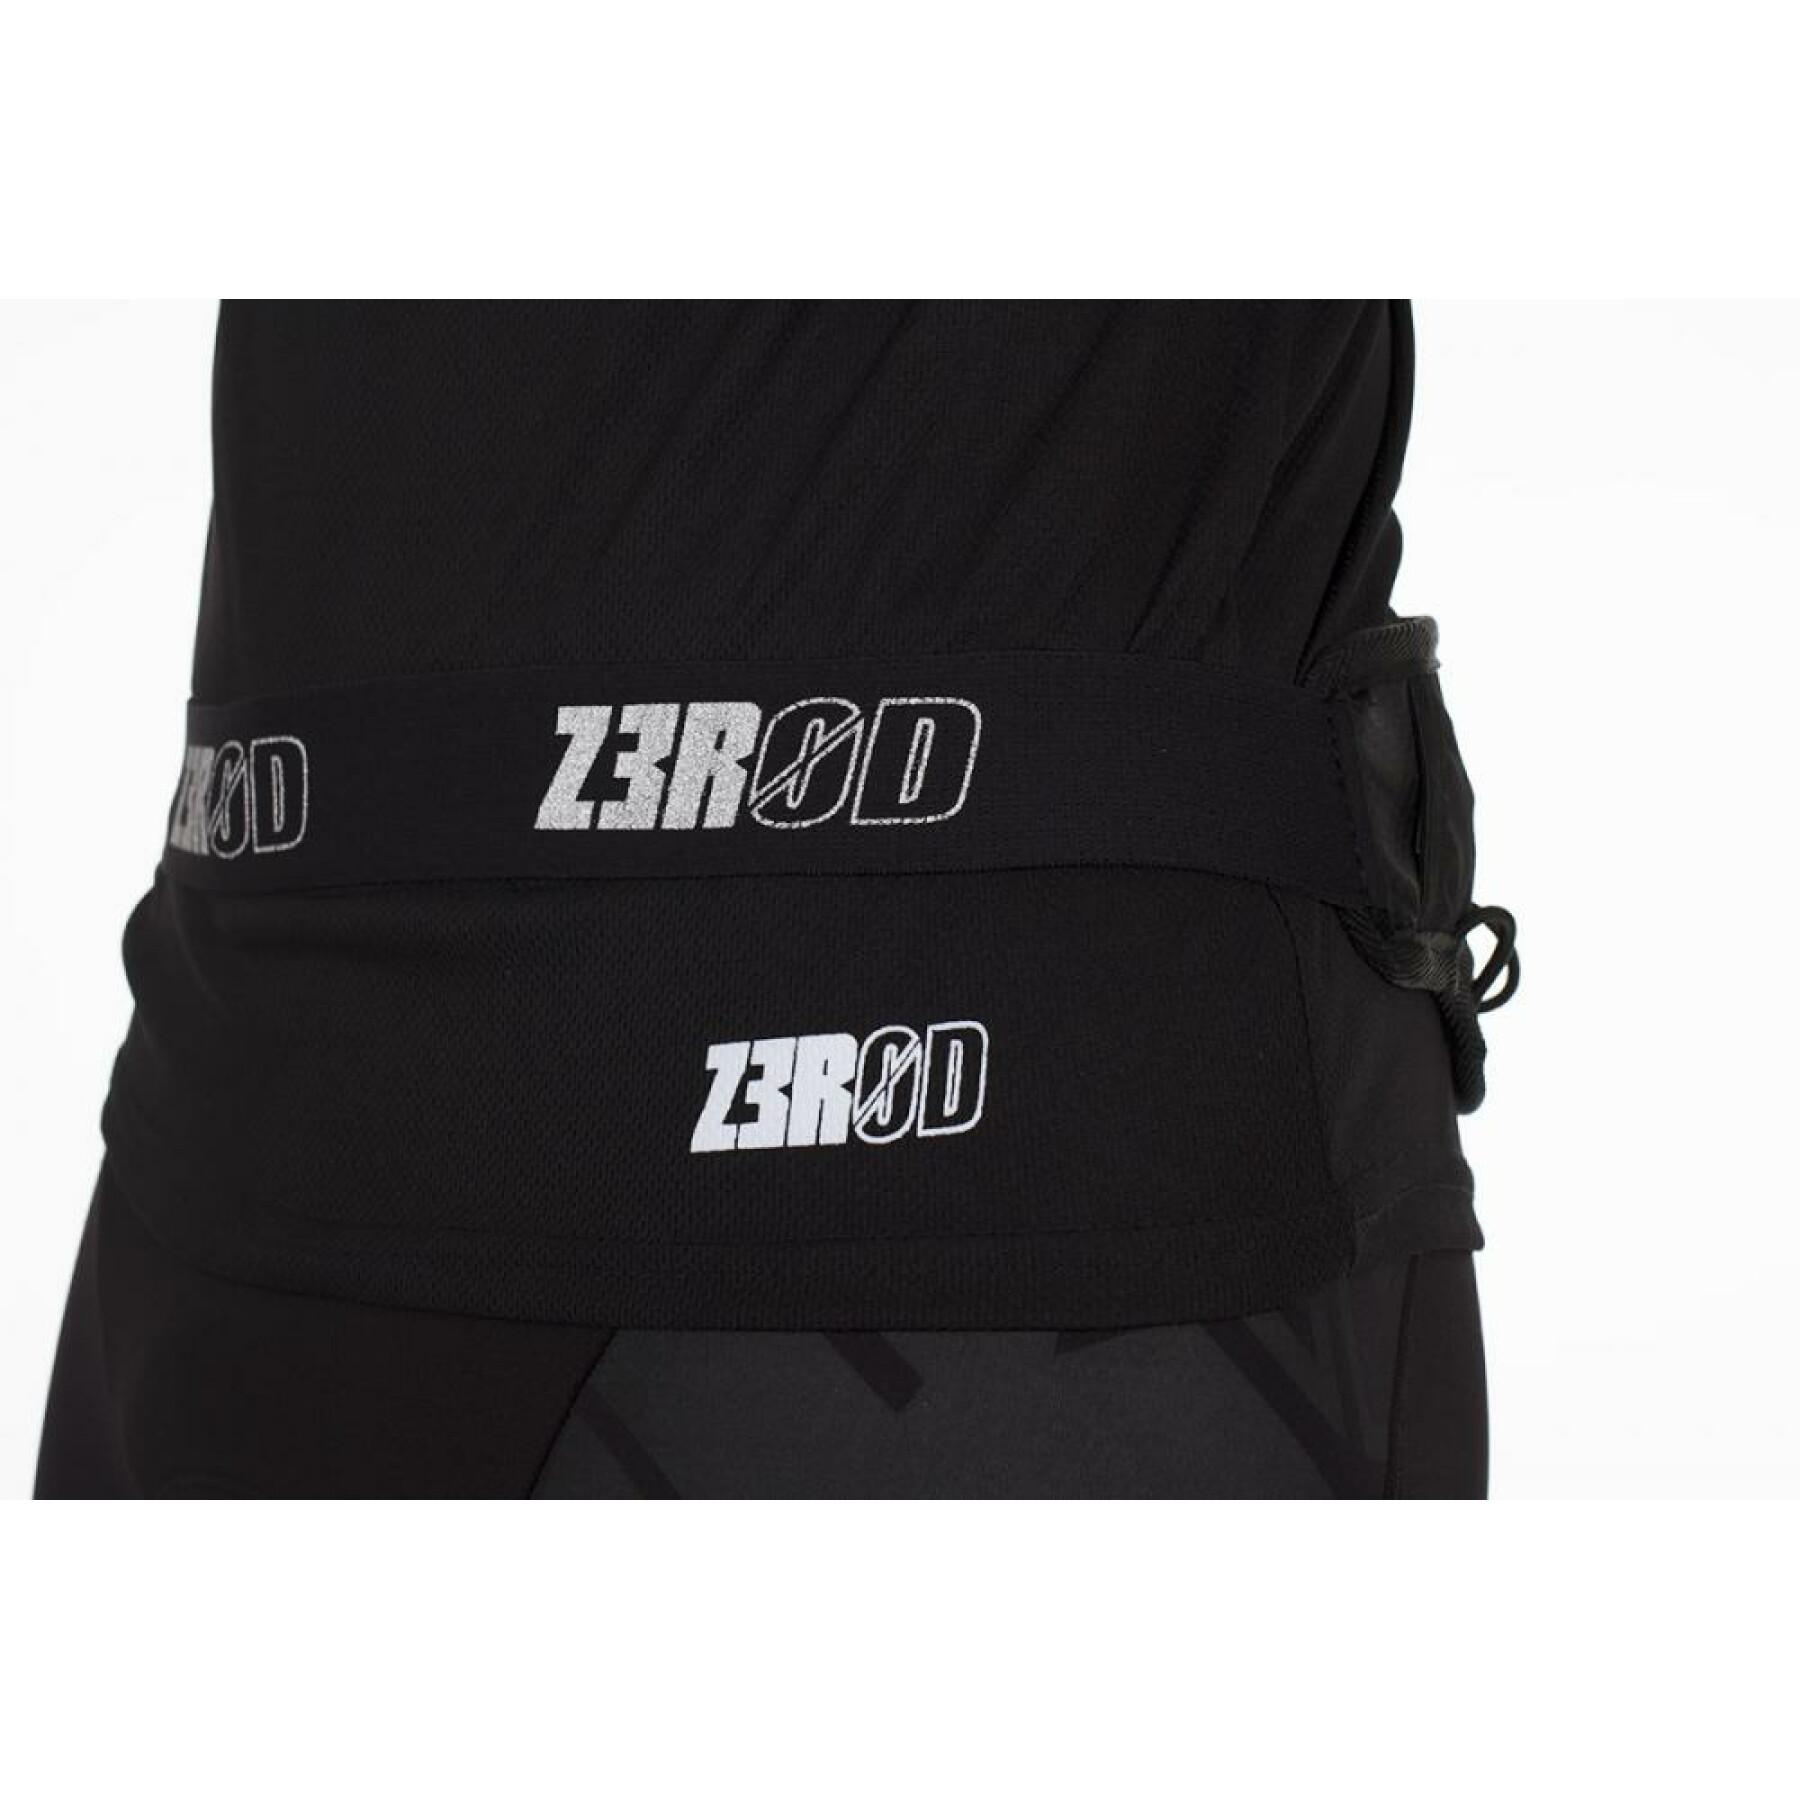 Loopband Z3R0D